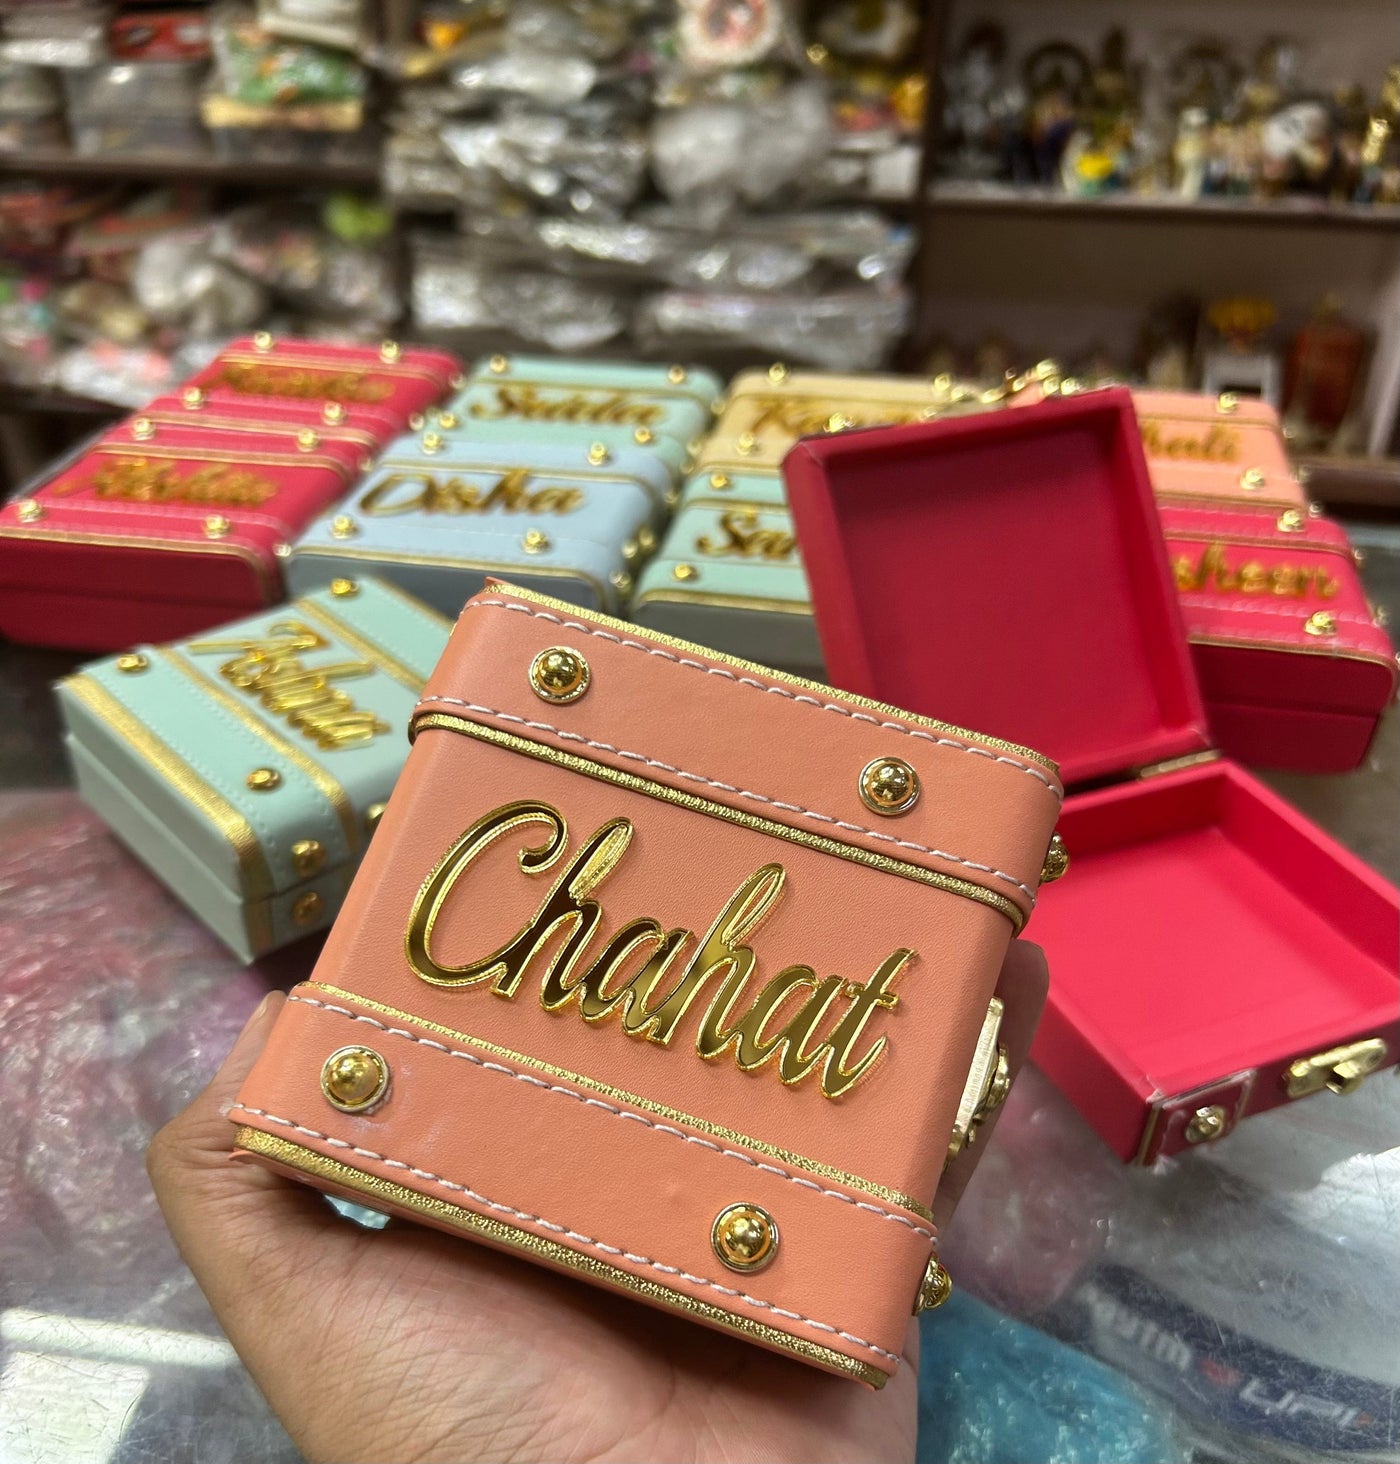 160 rs each on buying 30 pcs / WhatsApp at 8619550223 to order 🔥 leatherite boxes Customized mini trunk boxes for gifting 🎁 / small leatherite lock boxes for wedding favors and birthday anniversary return gifts